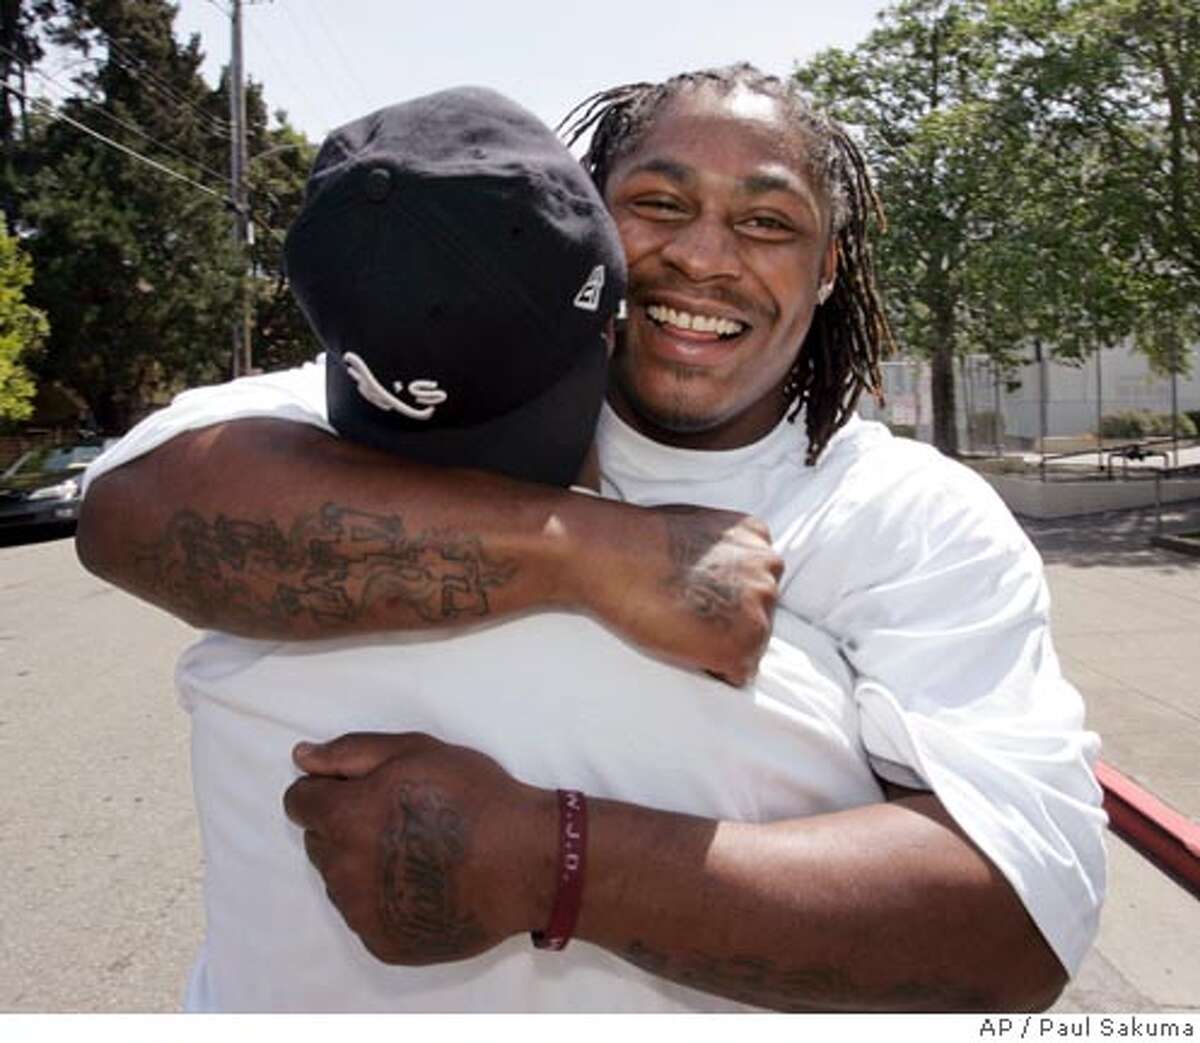 California running back Marshawn Lynch hugs a friend at his former high school, Oakland Technical High School, in Oakland, Calif., Saturday, April 28, 2007, after he was picked by the Buffalo Bills as the No. 12 pick overall in the NFL football draft. (AP Photo/Paul Sakuma)